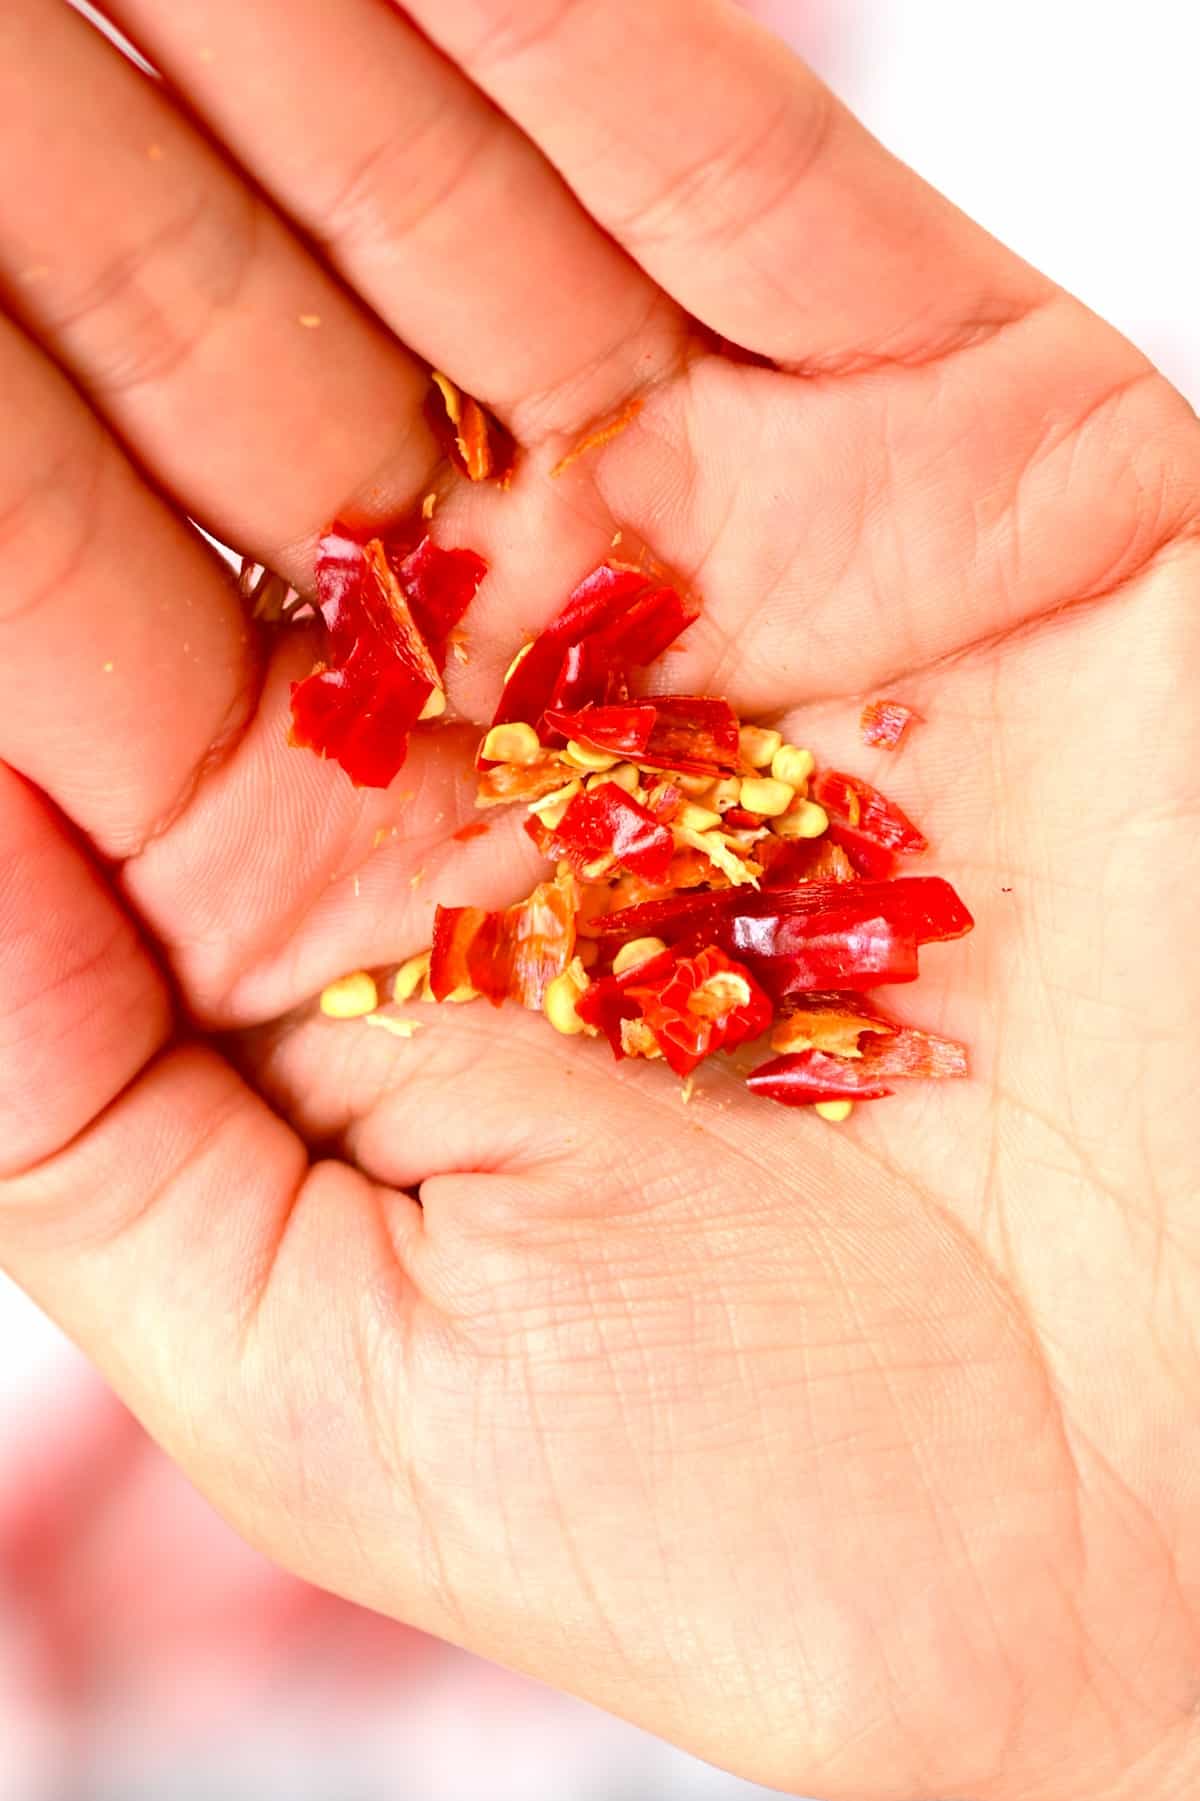 Red chili flakes in the palm of a hand